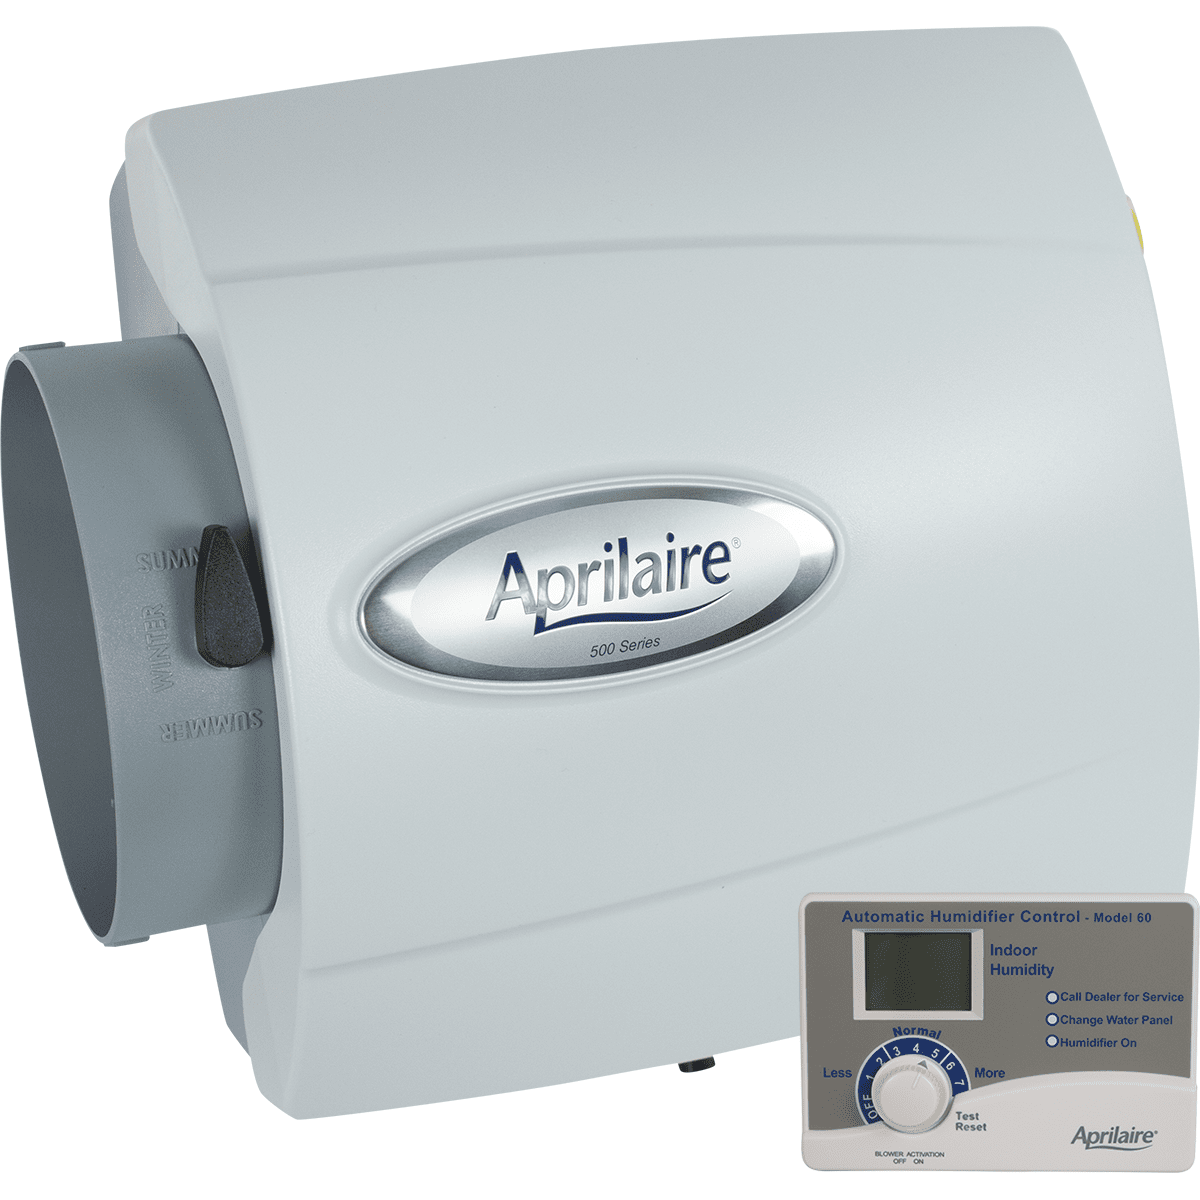 Aprilaire 500 Small Bypass Humidifier - Auto Digital Control